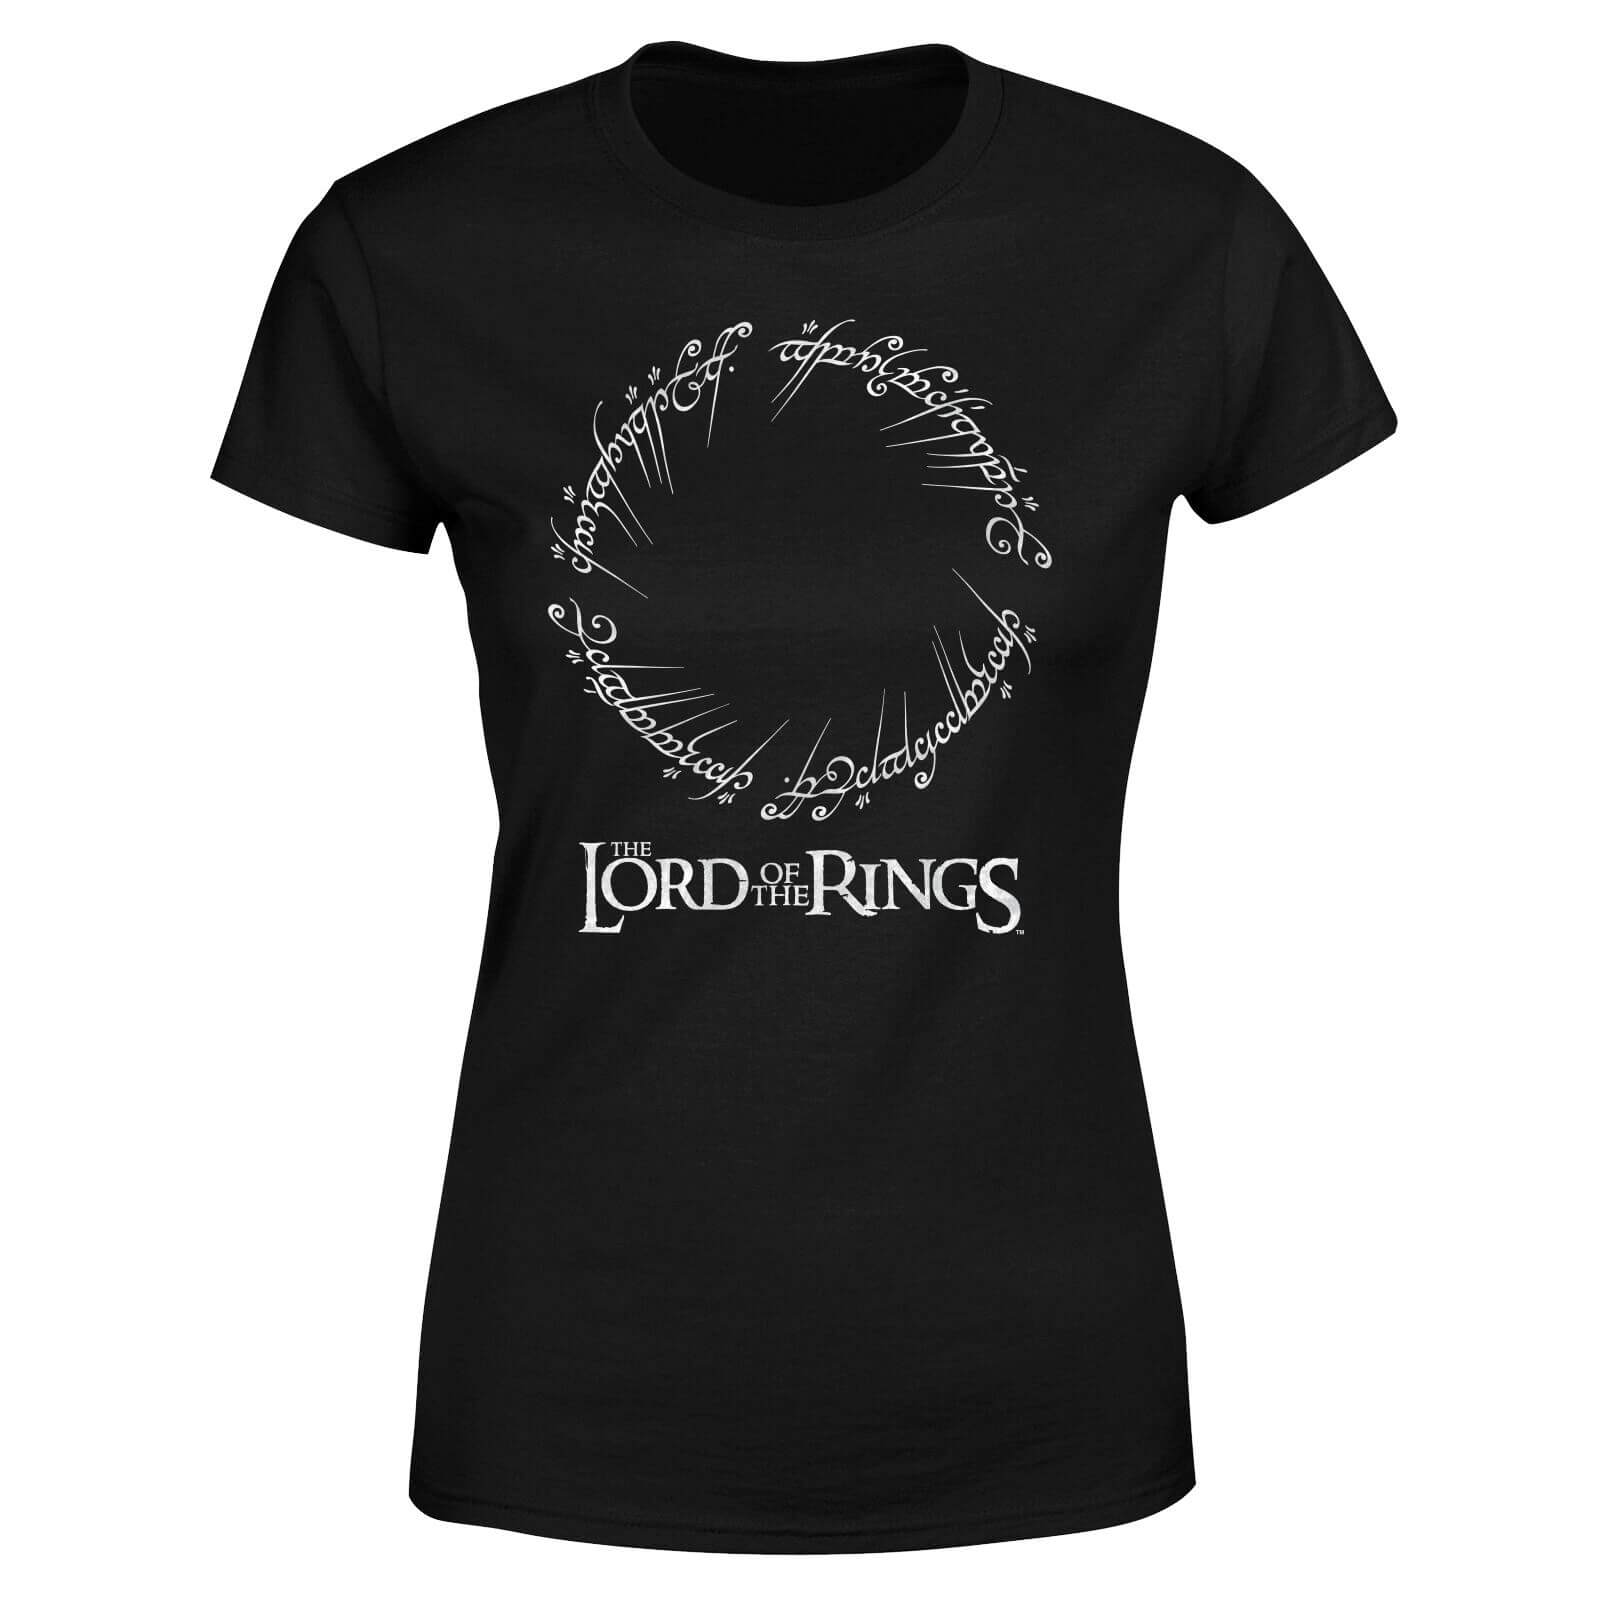 Lord Of The Rings Crest Women's T-Shirt - Black - XS - Noir